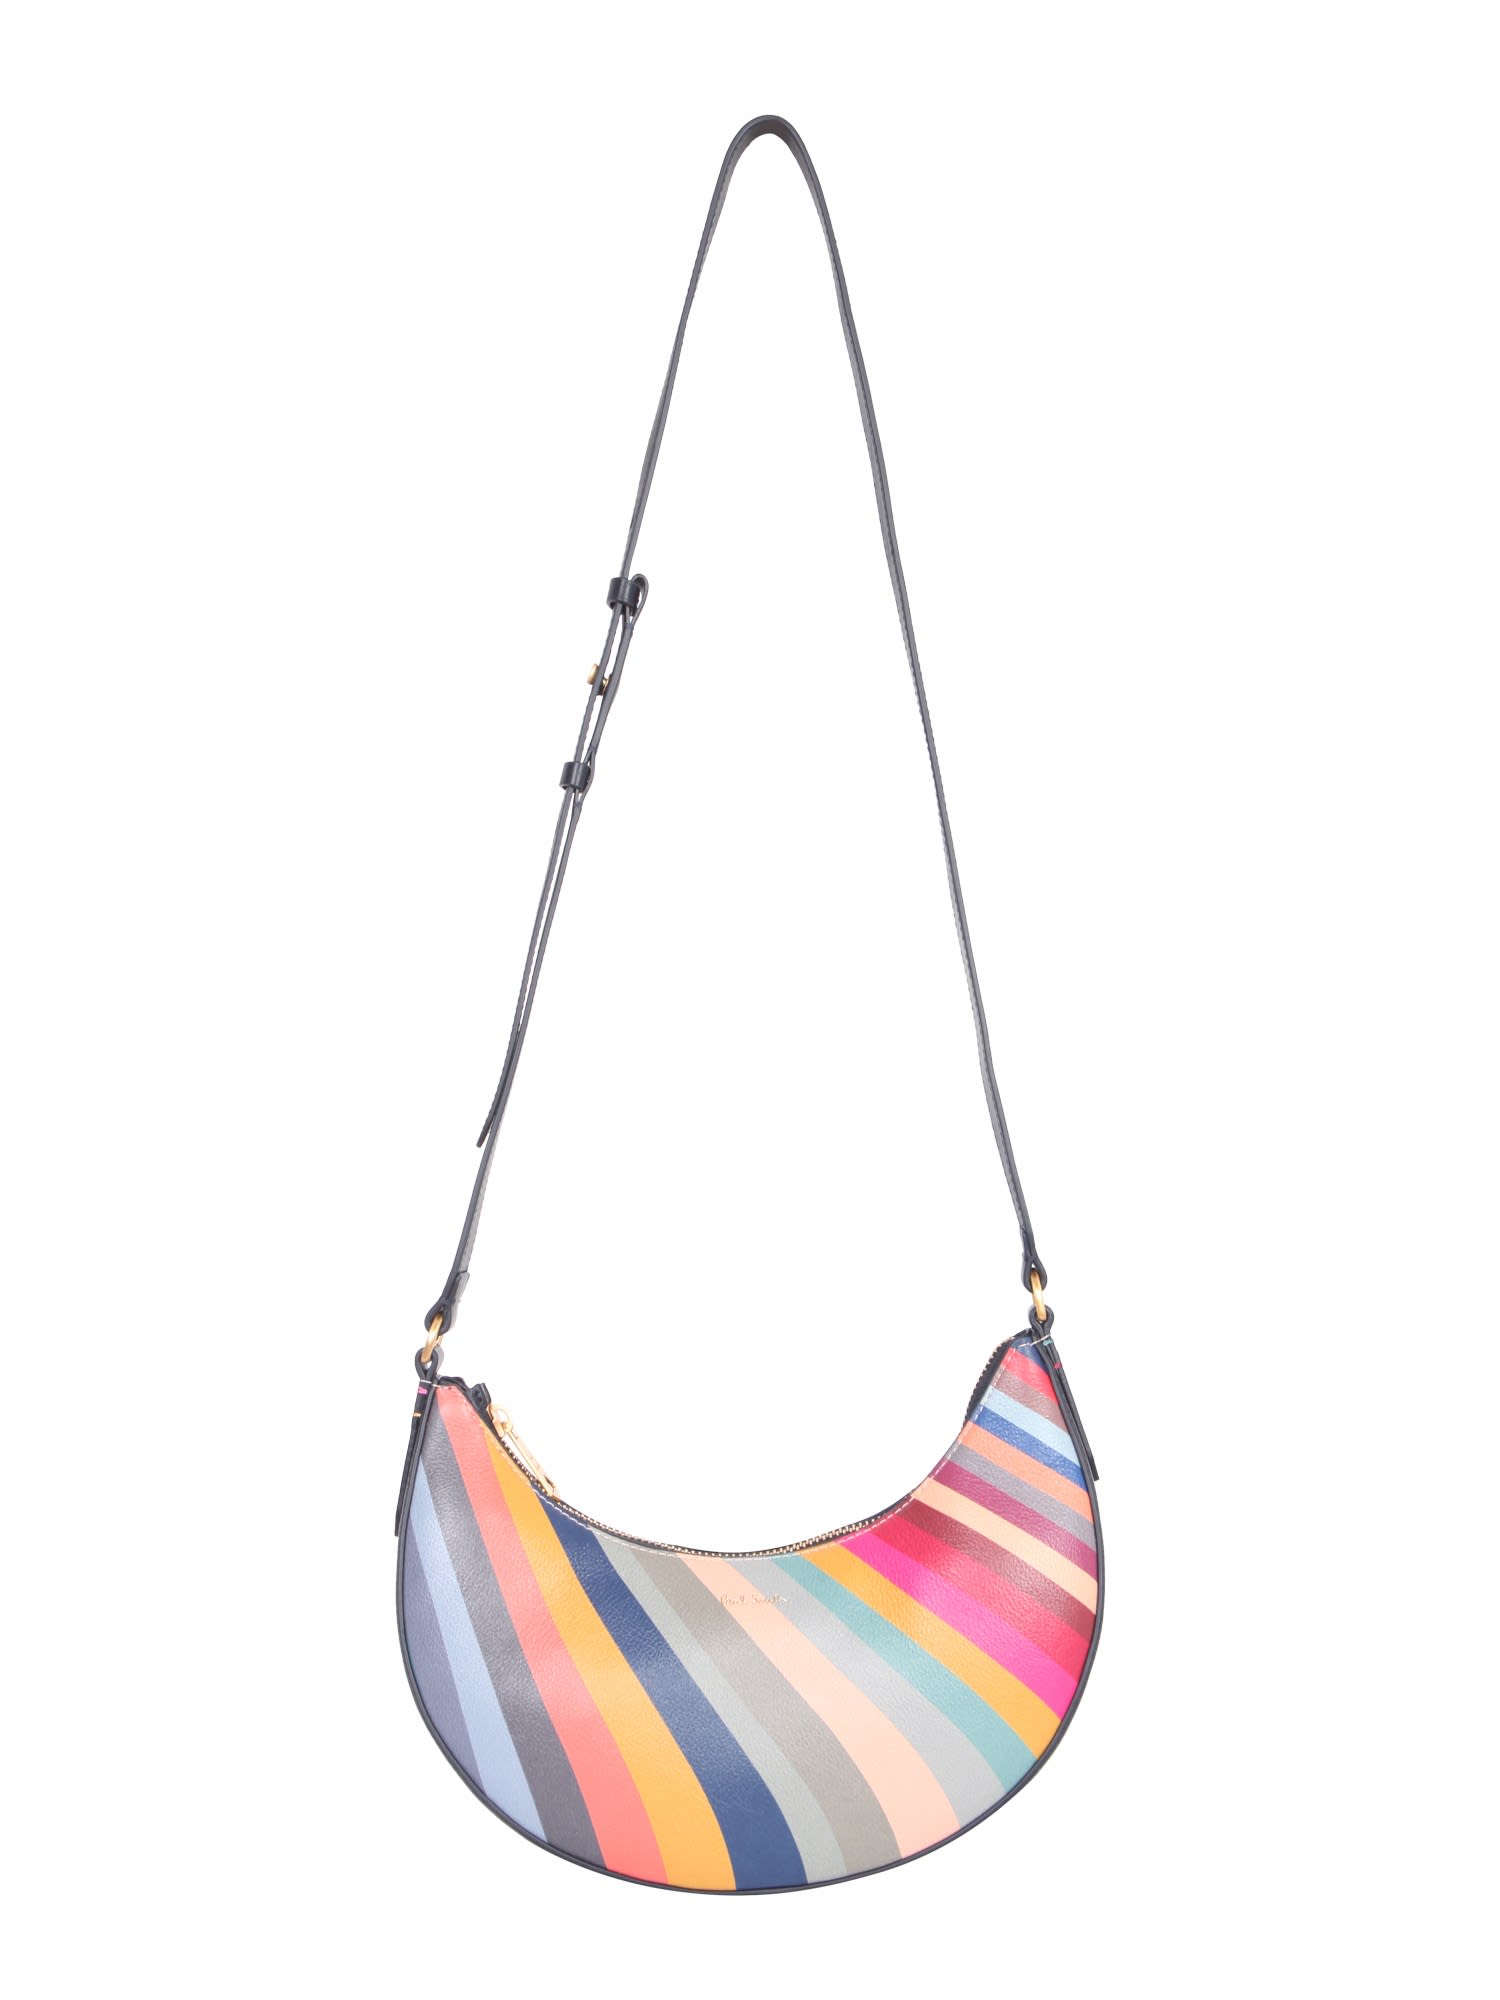 Paul Smith Crescent Bag With Swirl Print